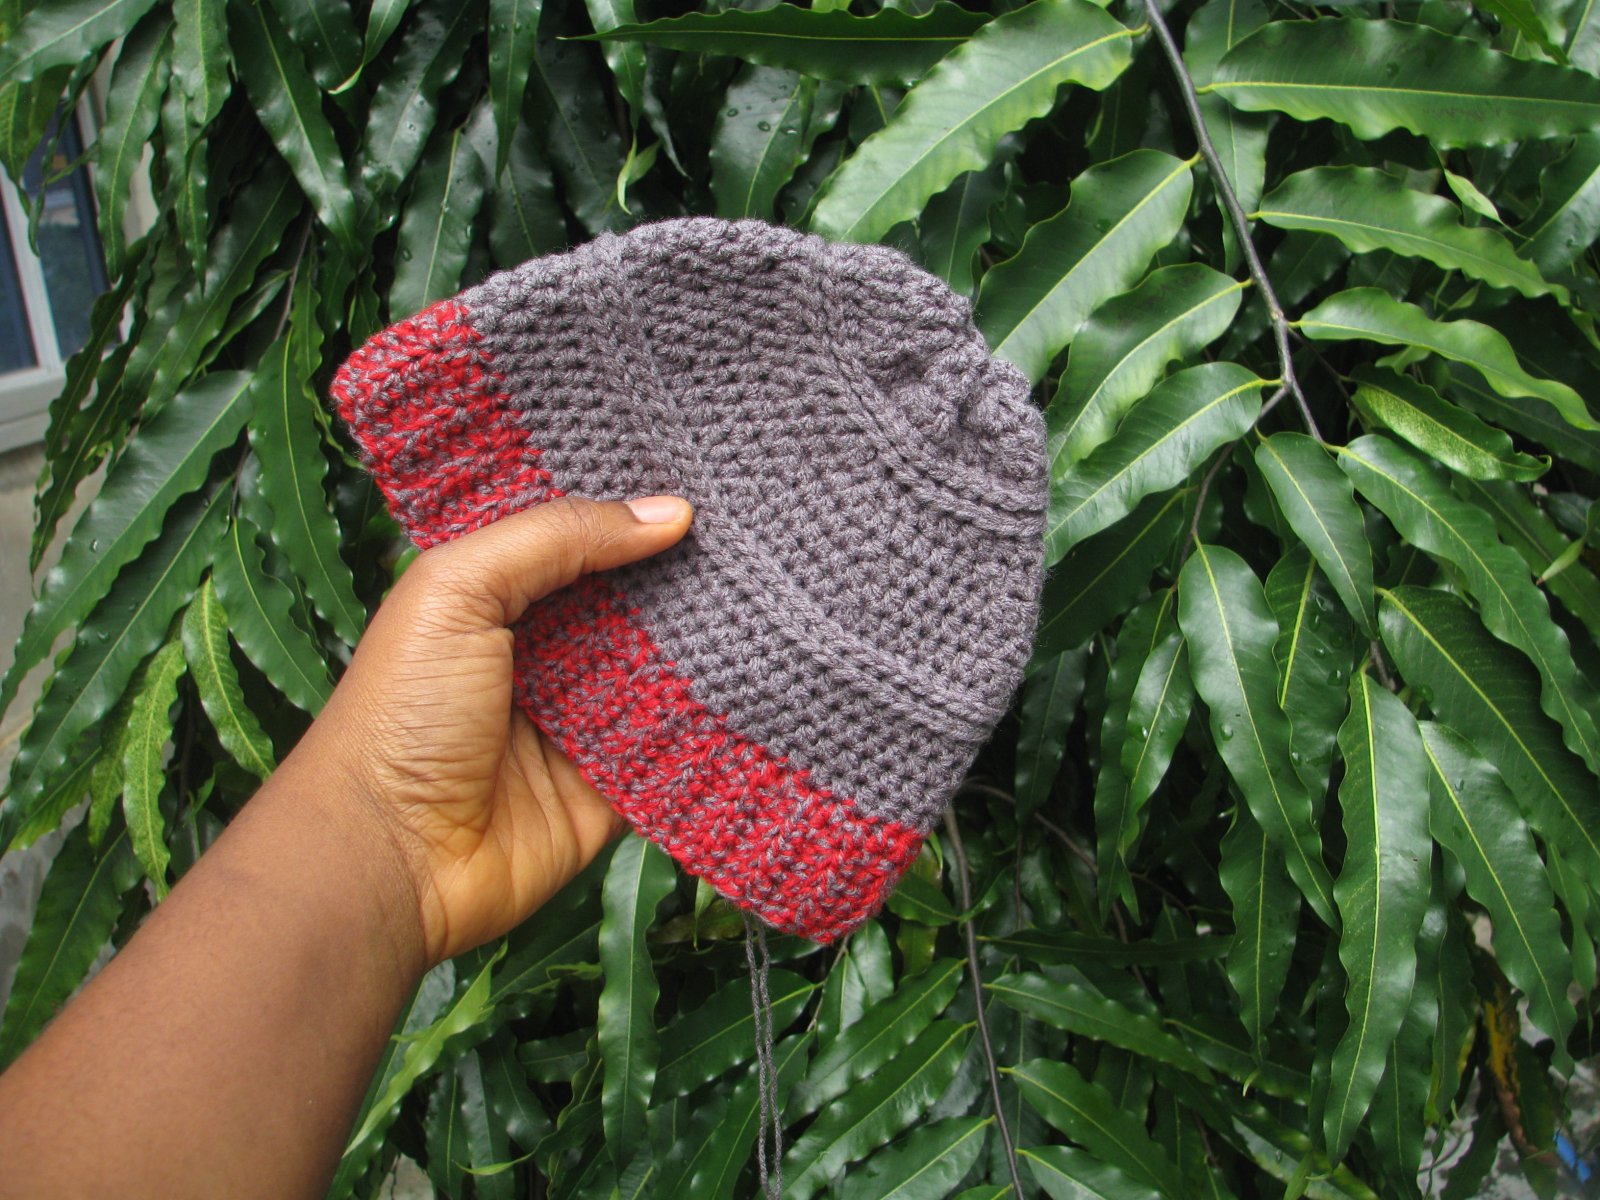 One of the hats I made for my 'hats with love' outreach.